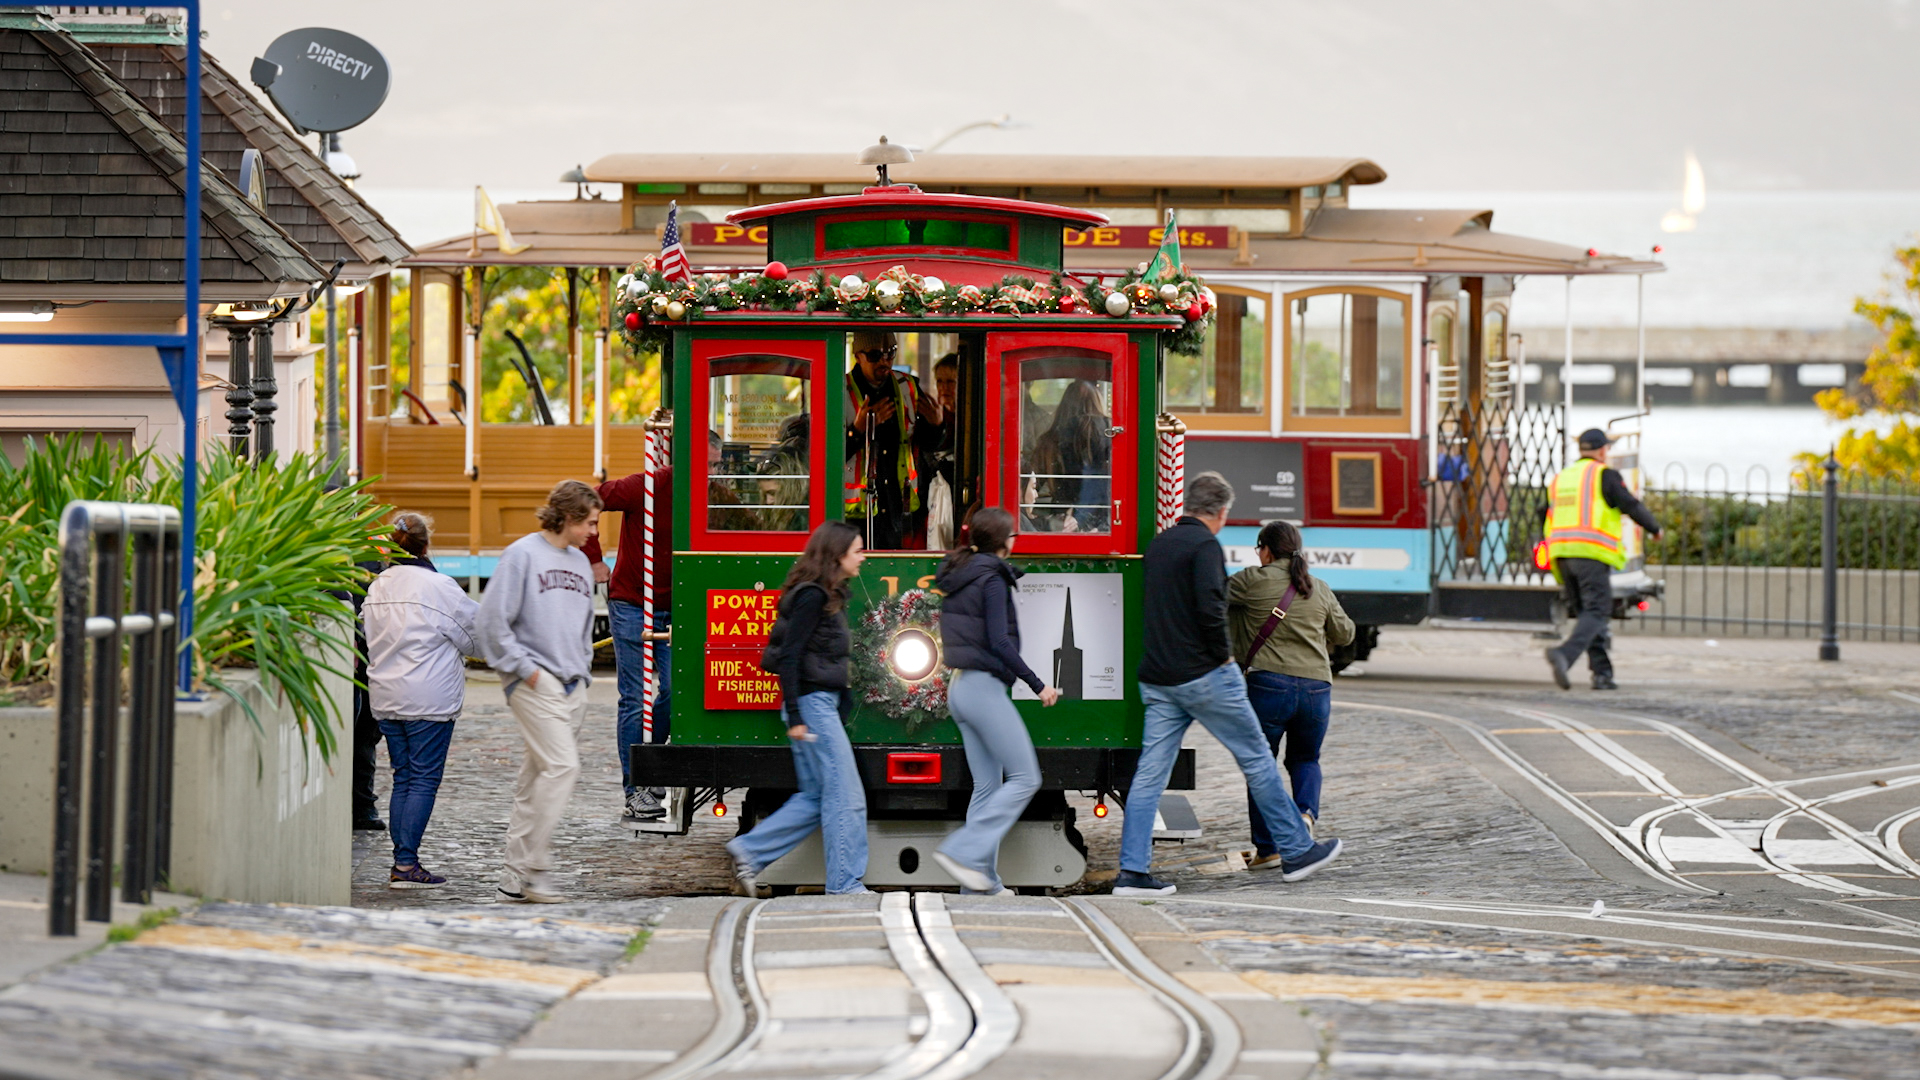 Passengers in casual dress walk around the front of a green and red cable car to board it. Behind them, another cable car is turned around on a turntable, and behind that, boats sail on the open waters of the Bay.